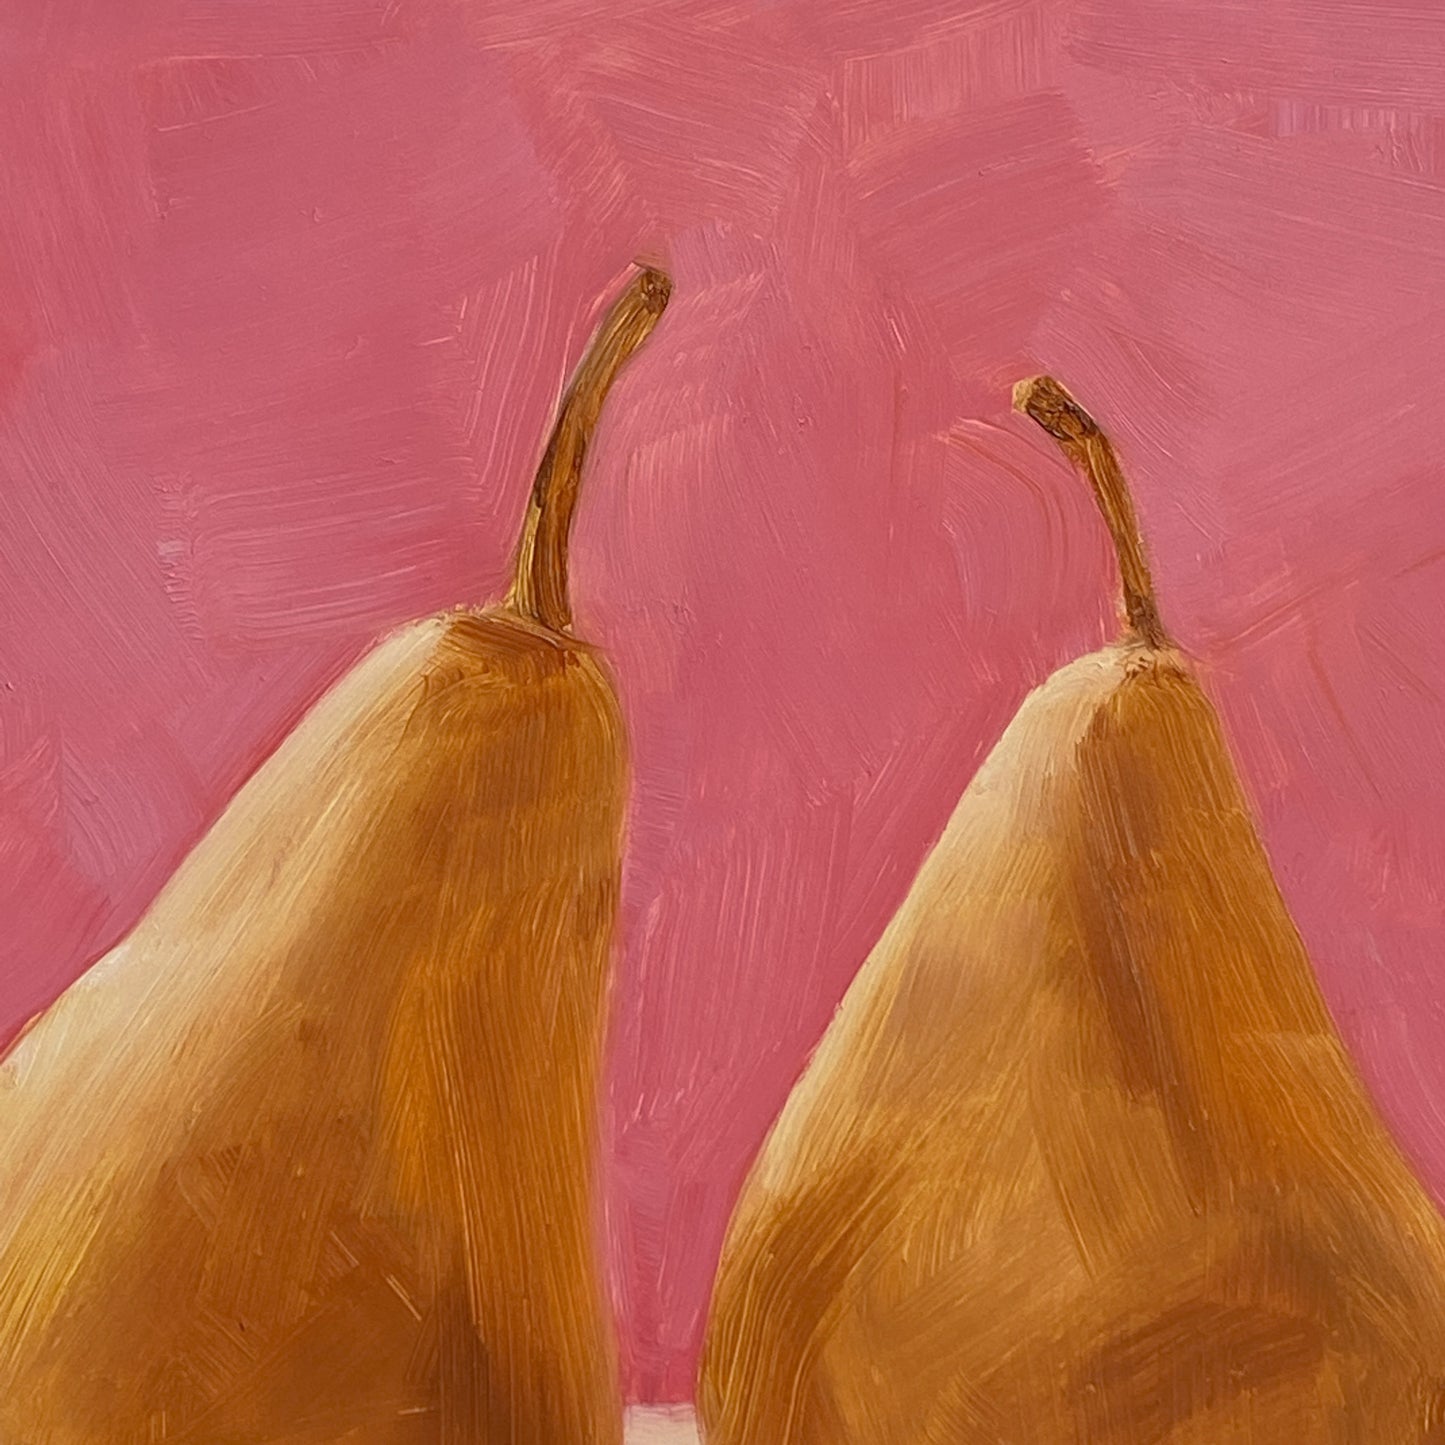 closeup of an original oil paintings of three beurre Bosc pears on a warm pink and creamy background